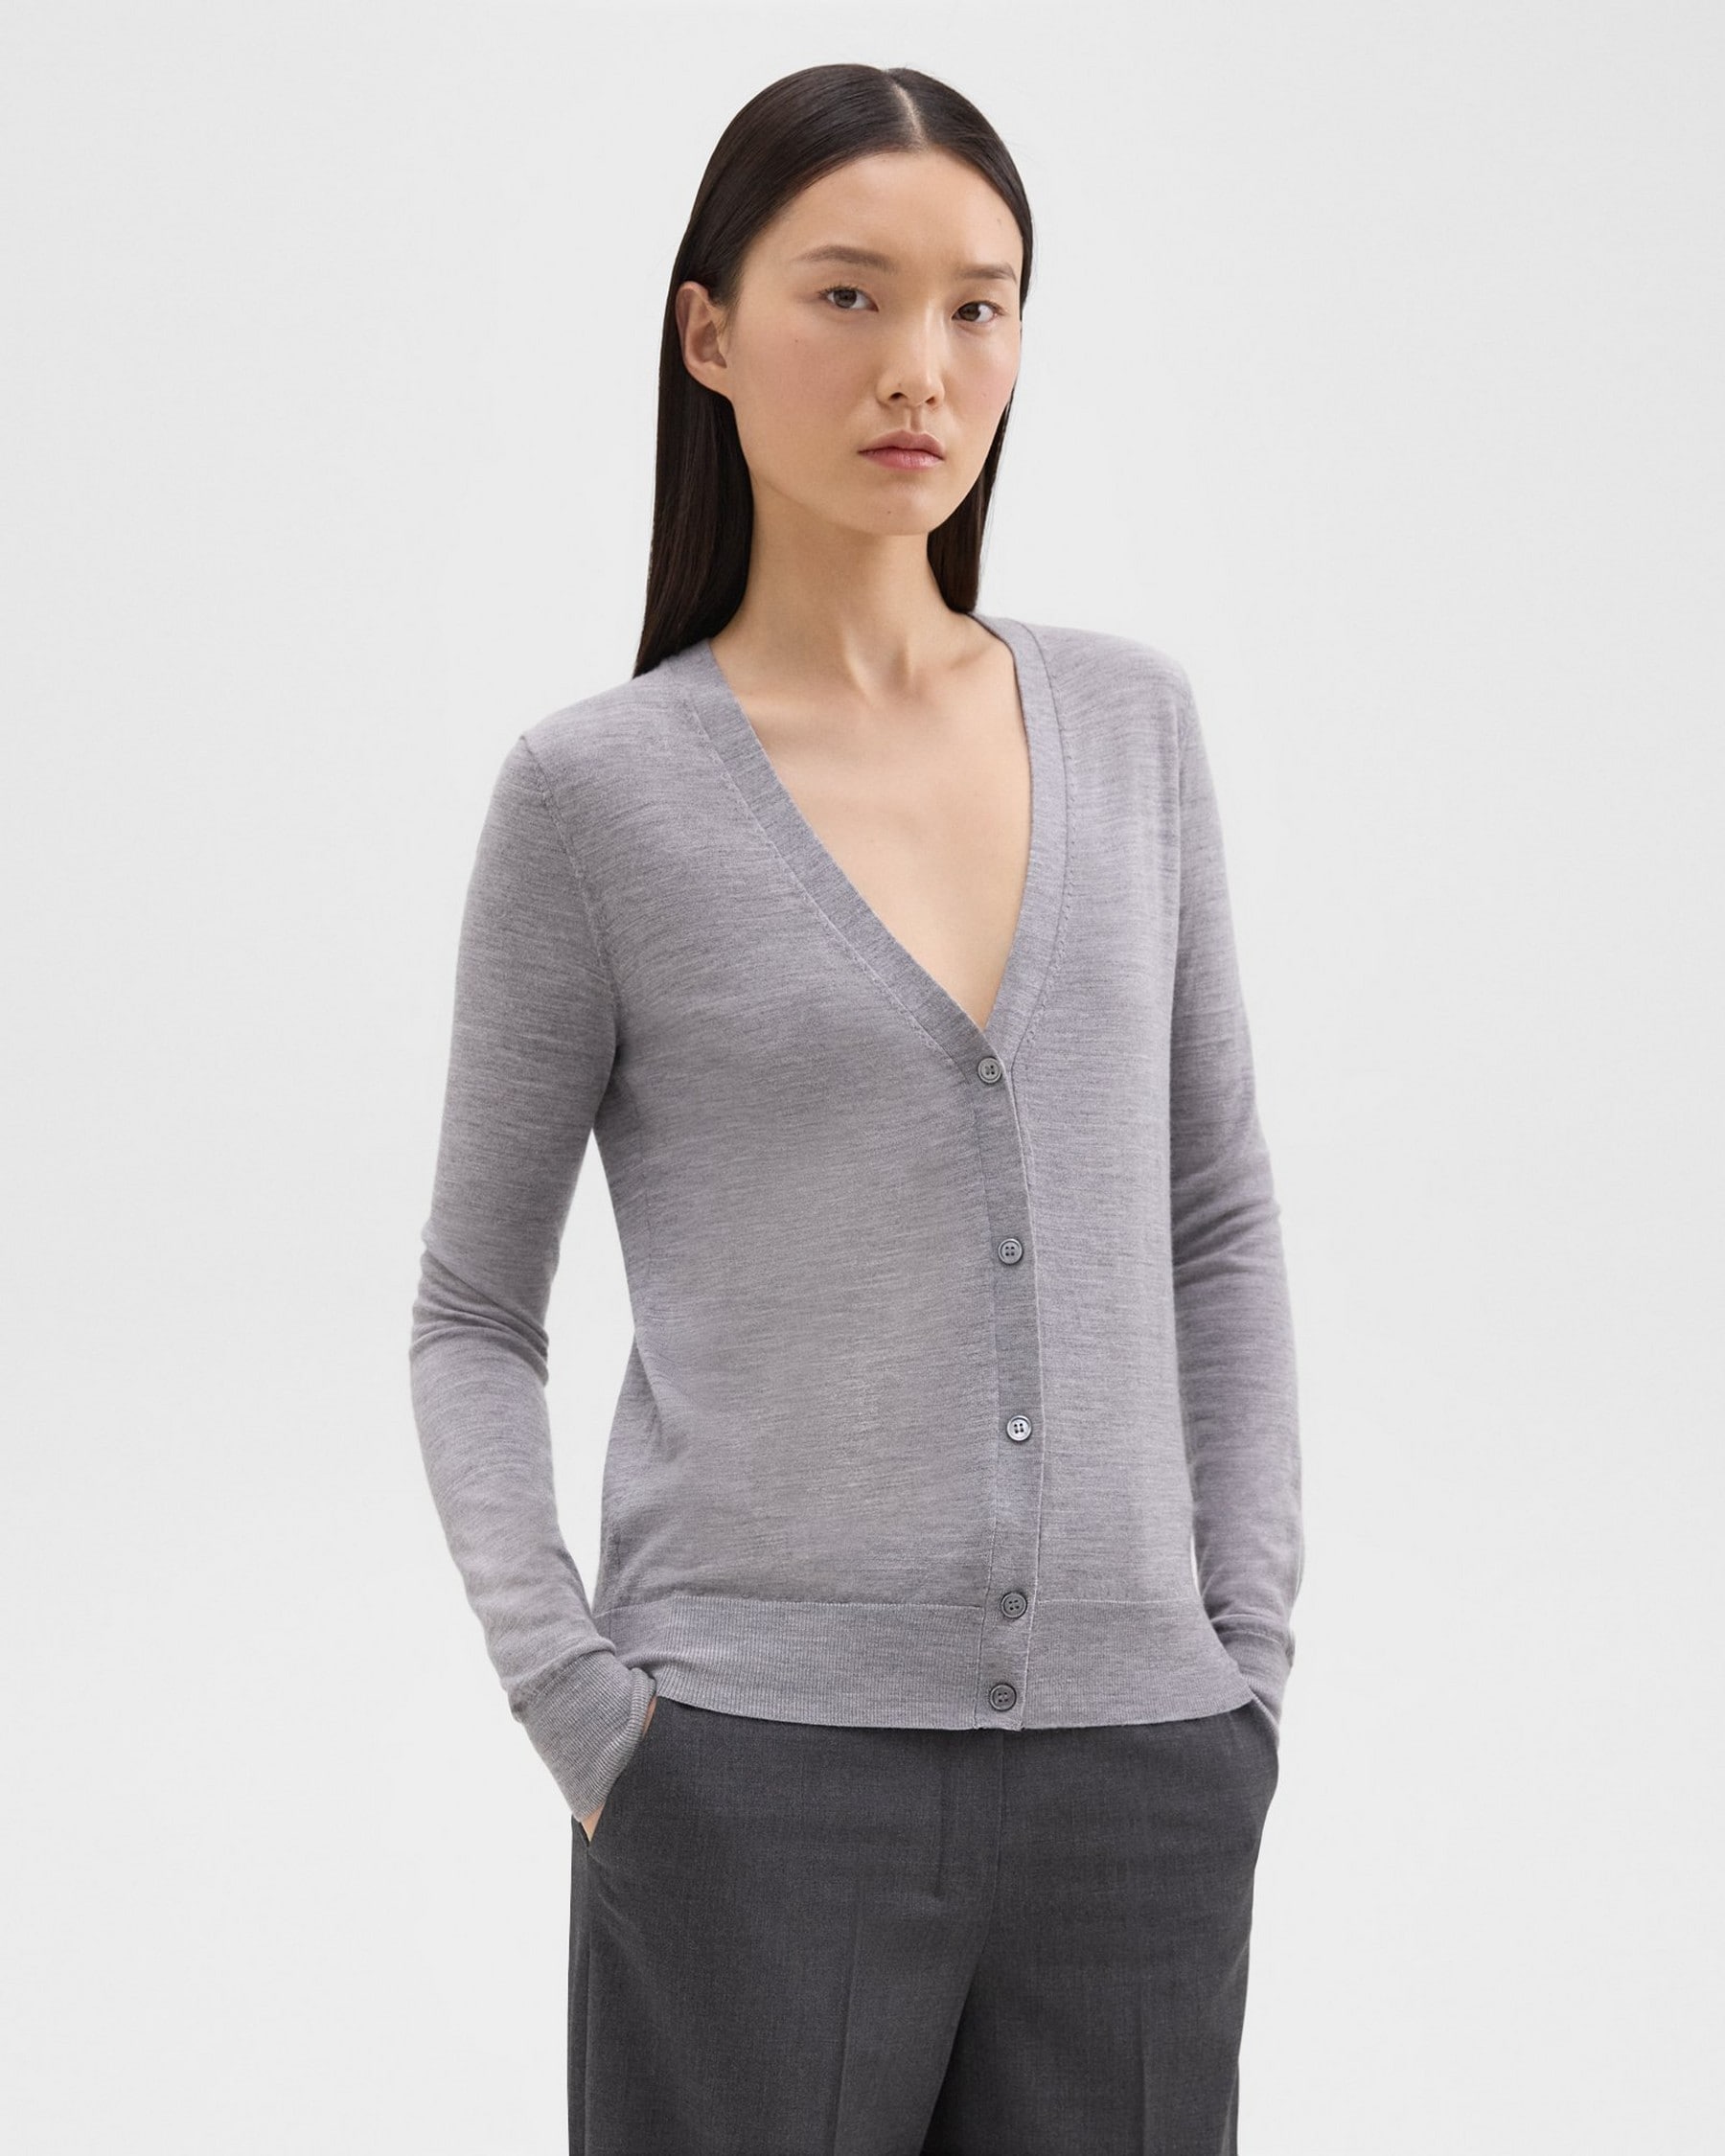 Theory V-Neck Cardigan in Regal Wool